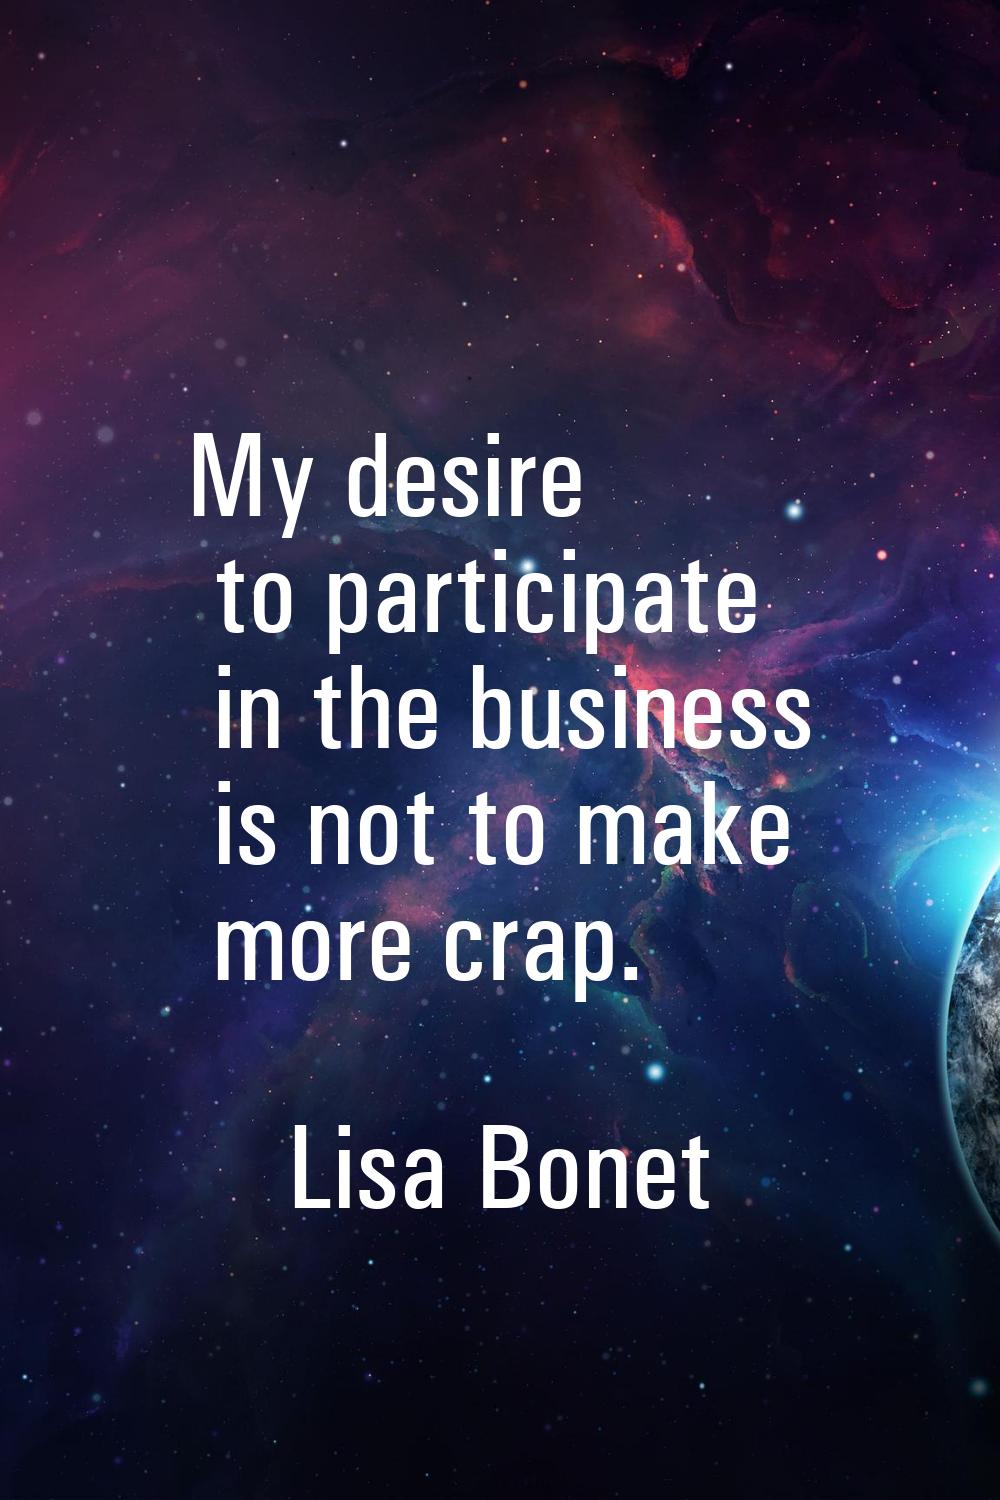 My desire to participate in the business is not to make more crap.